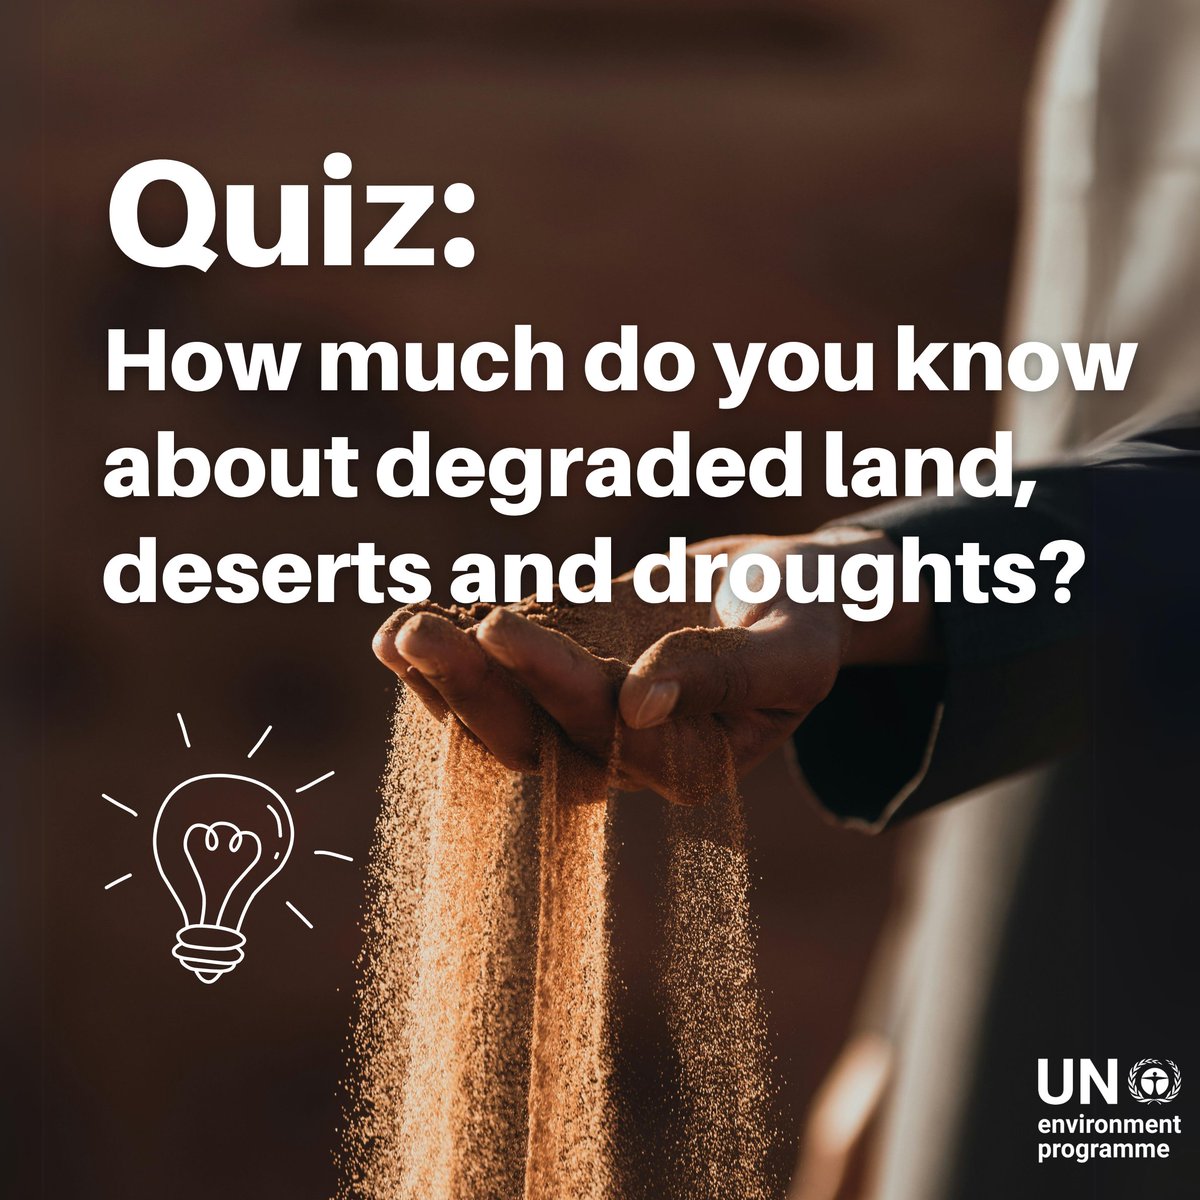 How much do you know about degraded land, deserts and drought? Test your knowledge ahead of #WorldEnvironmentDay on 5 June: unep.org/news-and-stori…